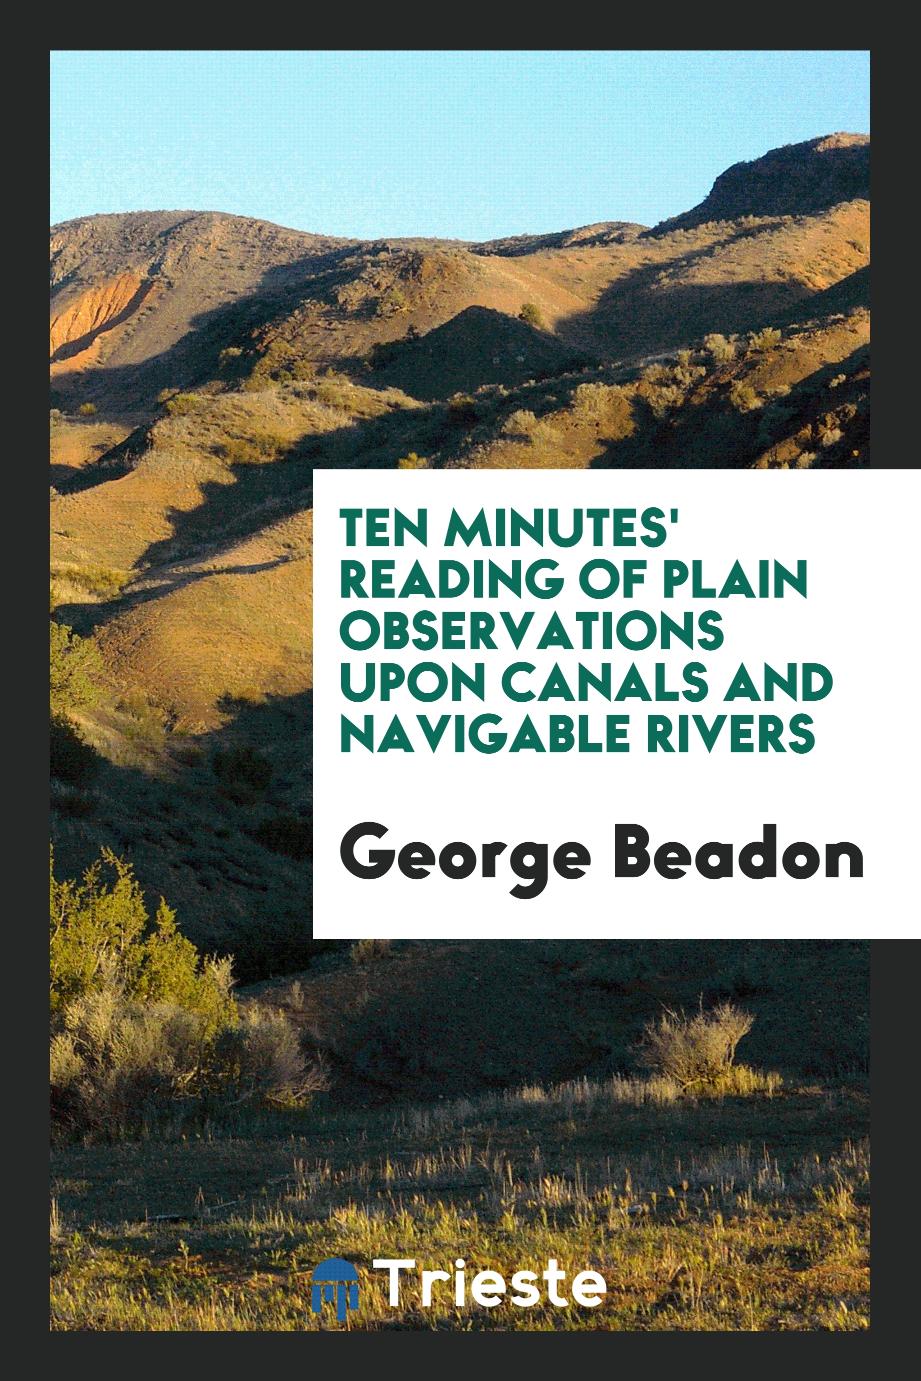 Ten minutes' reading of plain observations upon canals and navigable rivers